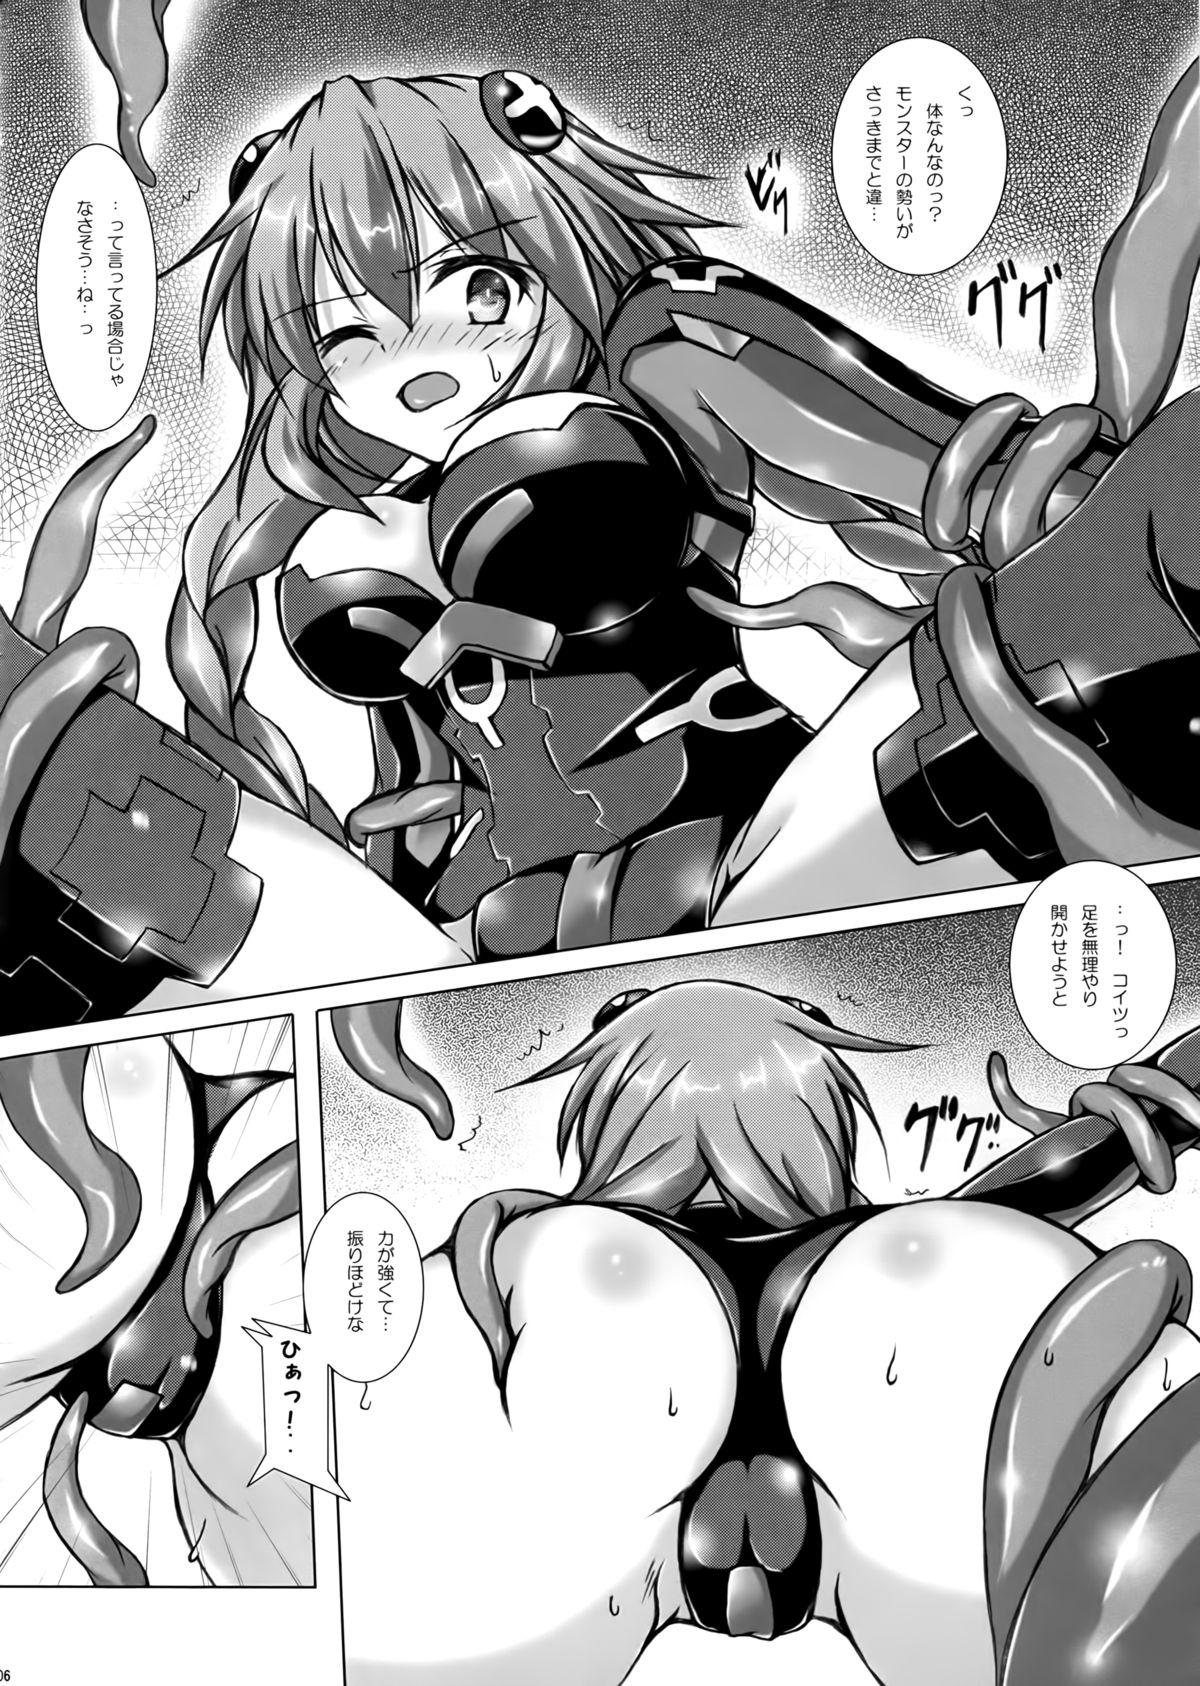 Camshow Tentacle Syndrome - Hyperdimension neptunia Sex Pussy - Page 6